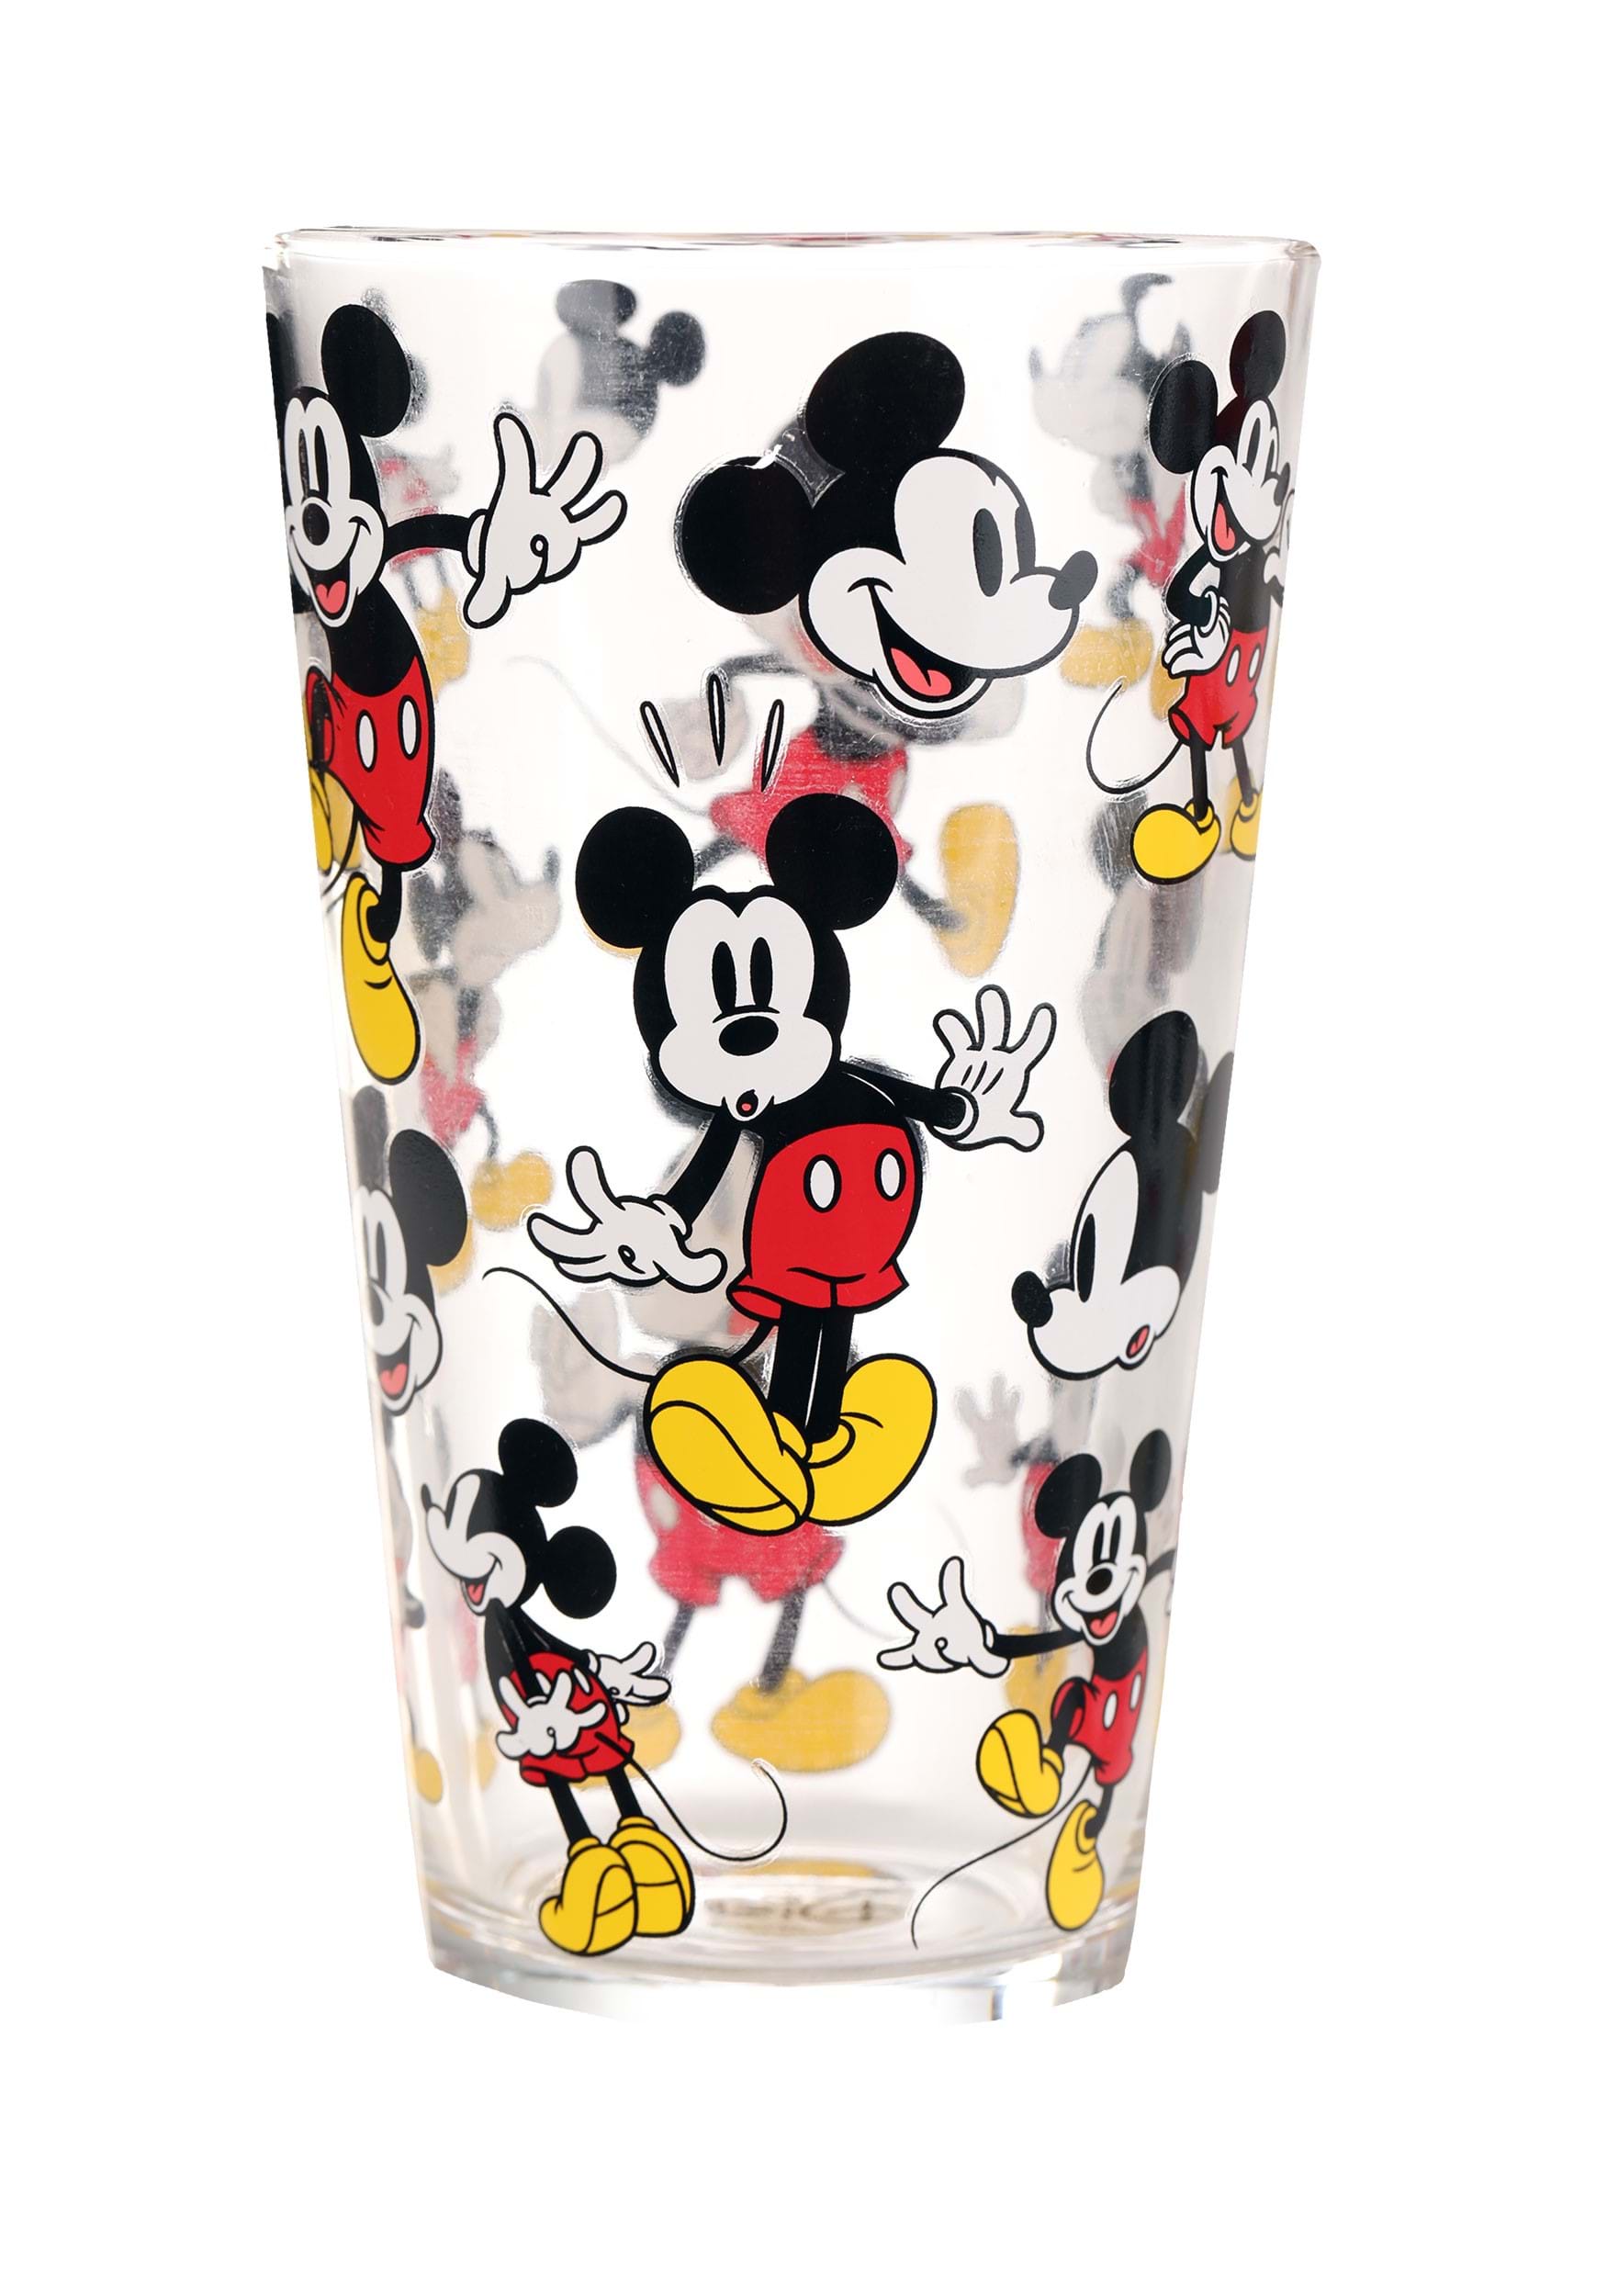 https://images.fun.com/products/87645/2-1-251832/disney-mickey-and-friends-tossed-poses-s-4-tumbler-alt-3.jpg